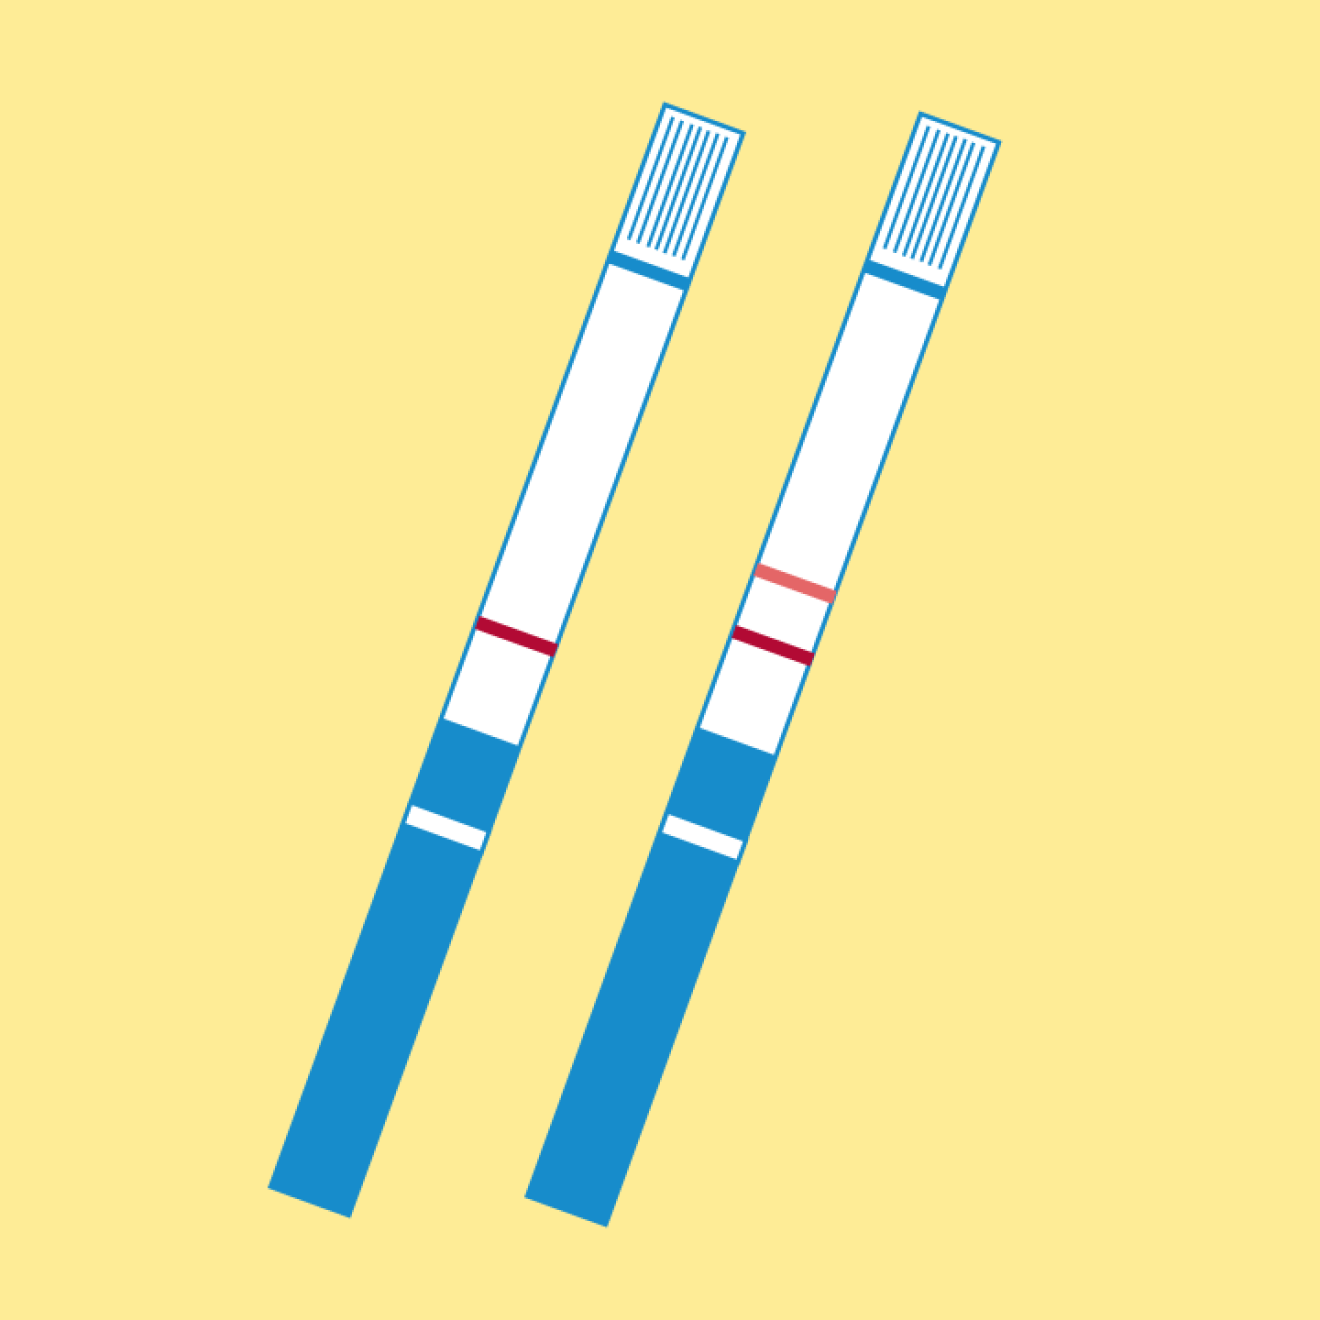 Flat-style illustration showing 2 long rectangular test strips in blue and white on a light yellow background